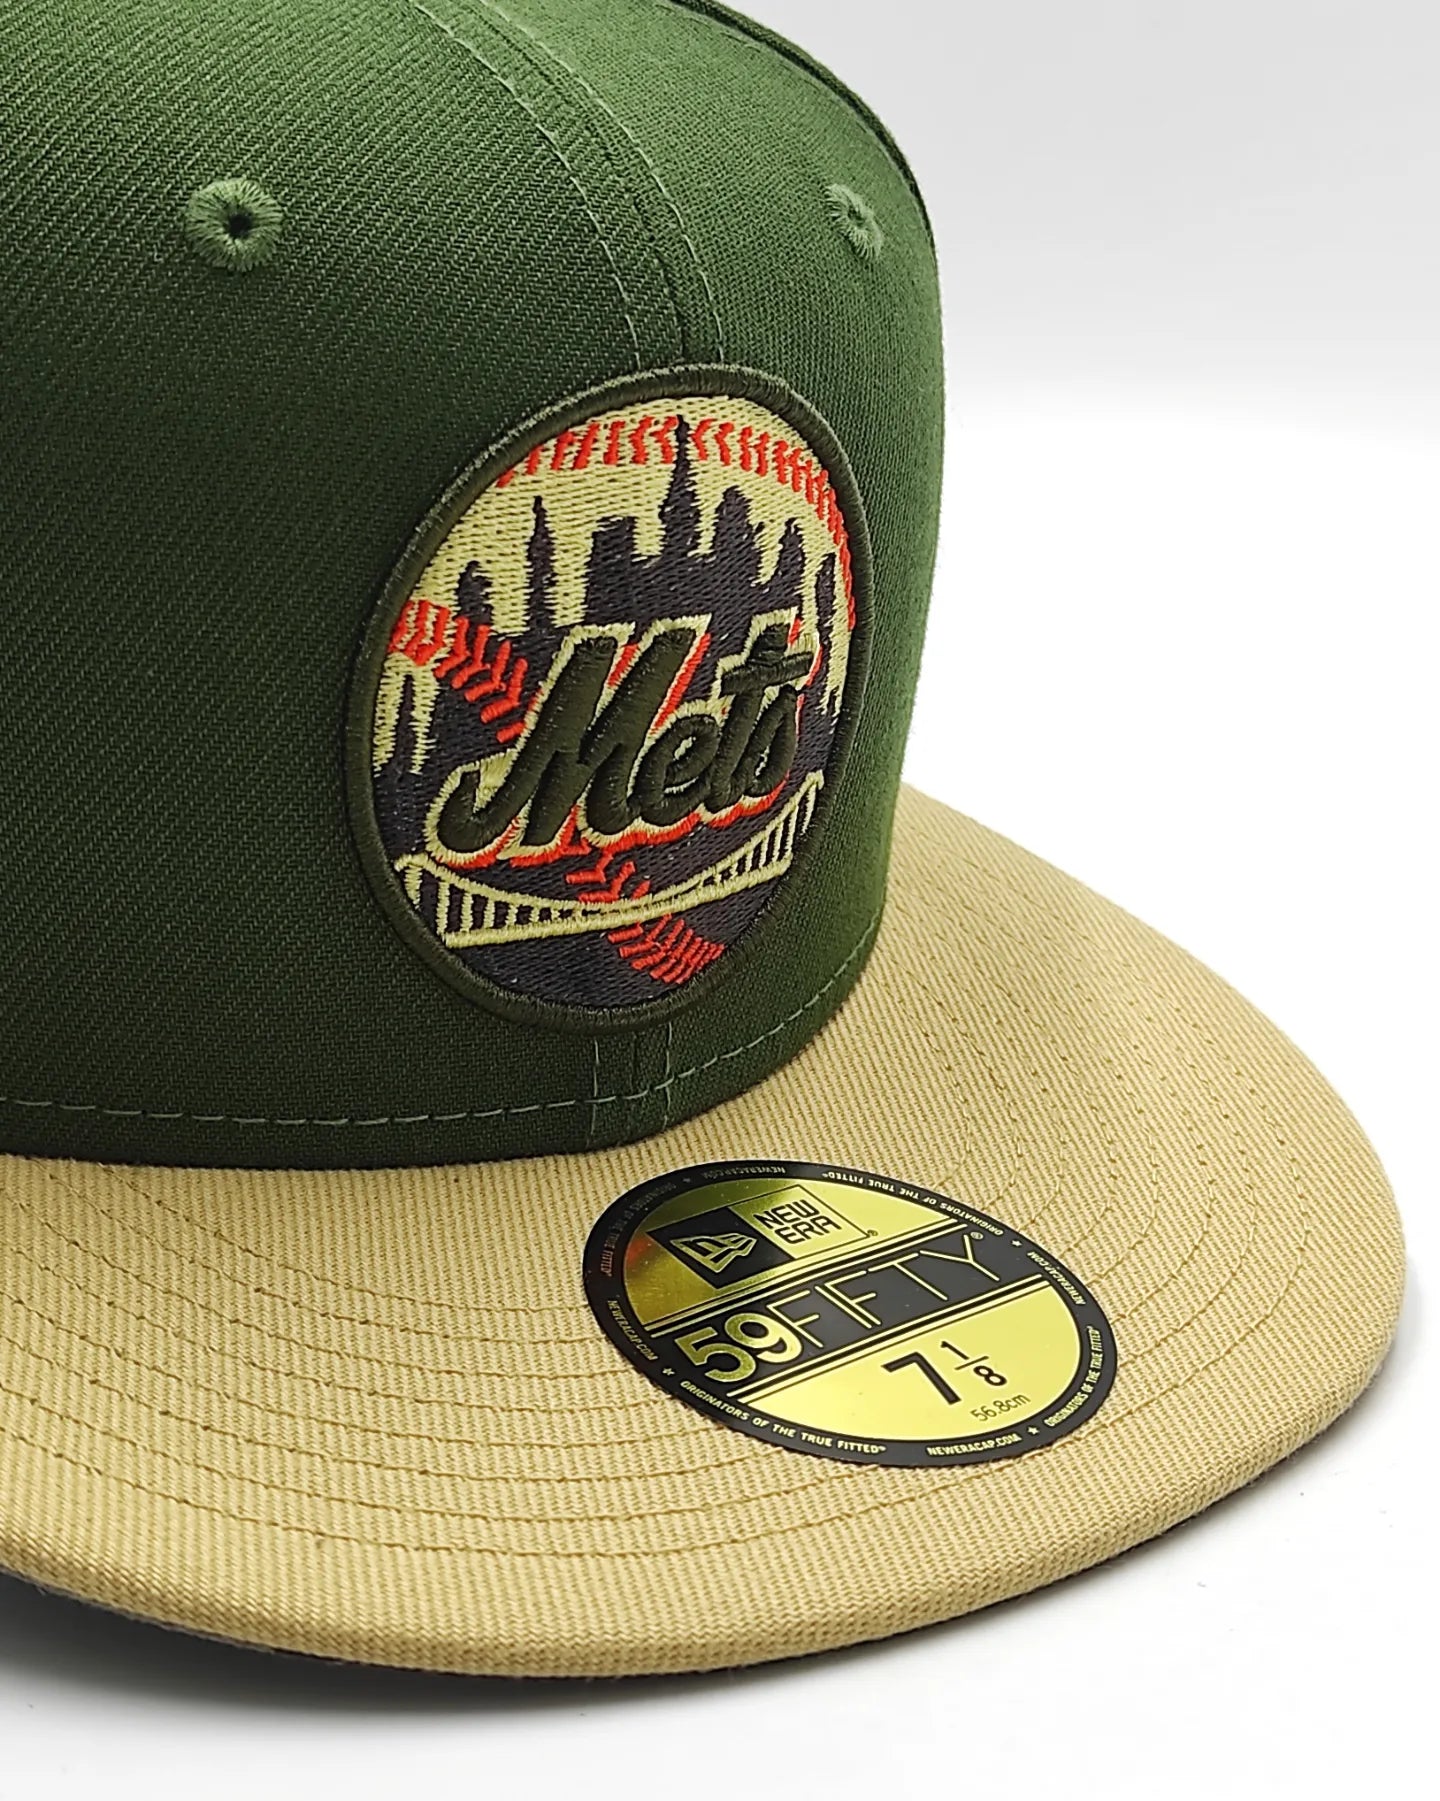 New Era New York Mets 60th anniversary camo two tone edition 59fifty fitted hat